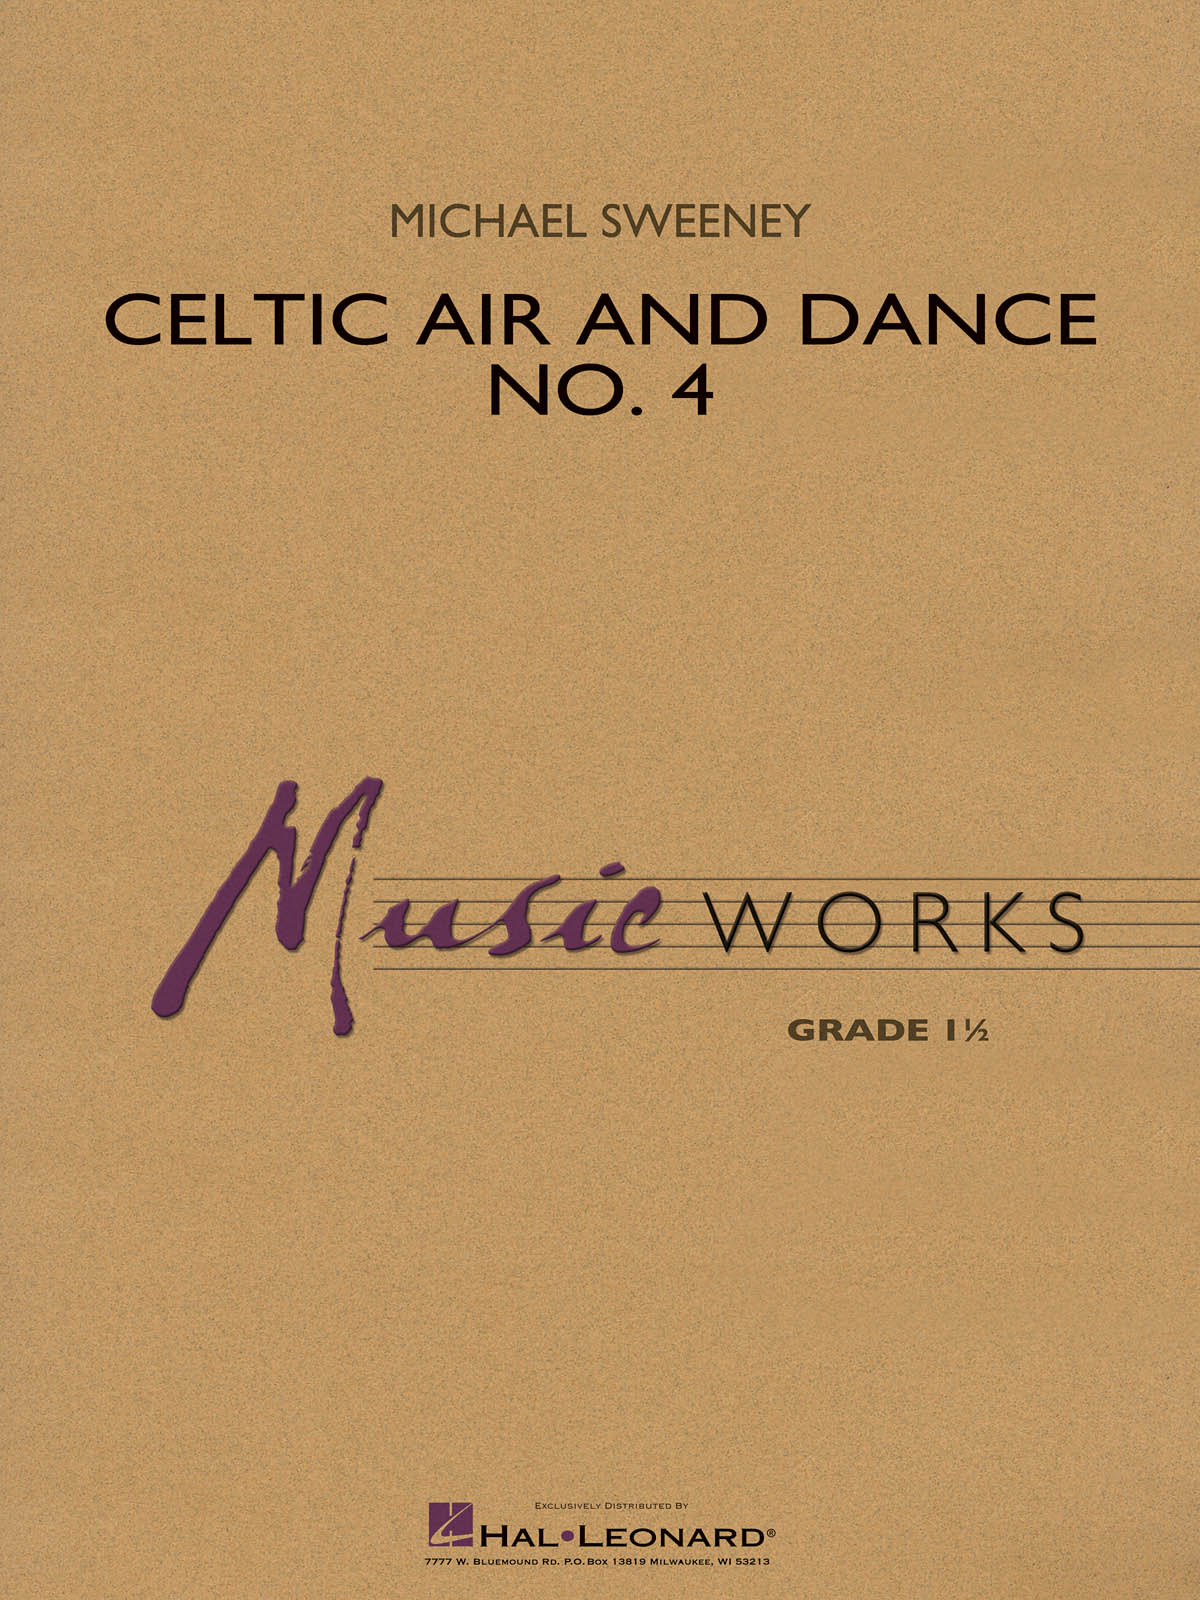 Michael Sweeney: Celtic Air and Dance No. 4: Concert Band: Score & Parts